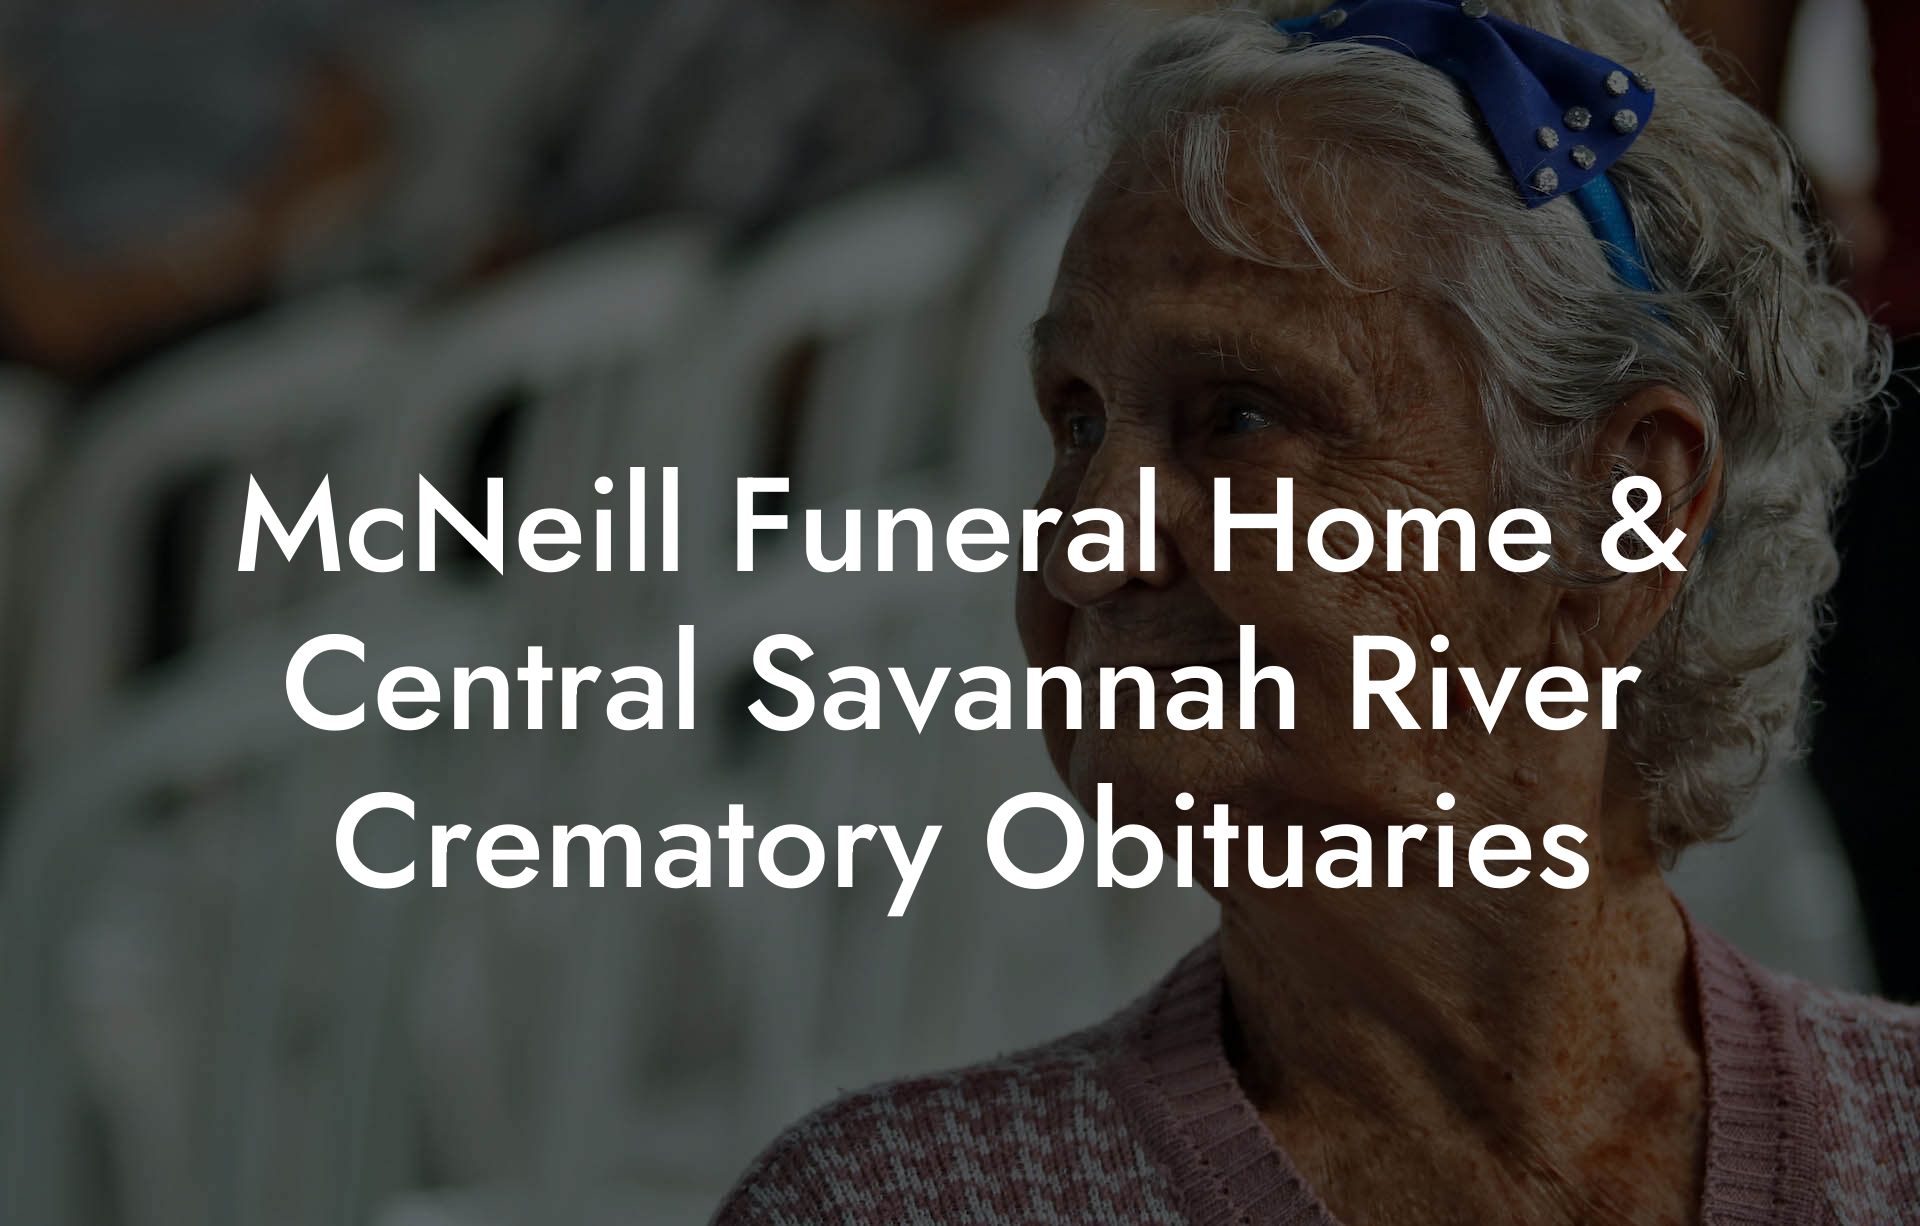 McNeill Funeral Home & Central Savannah River Crematory Obituaries